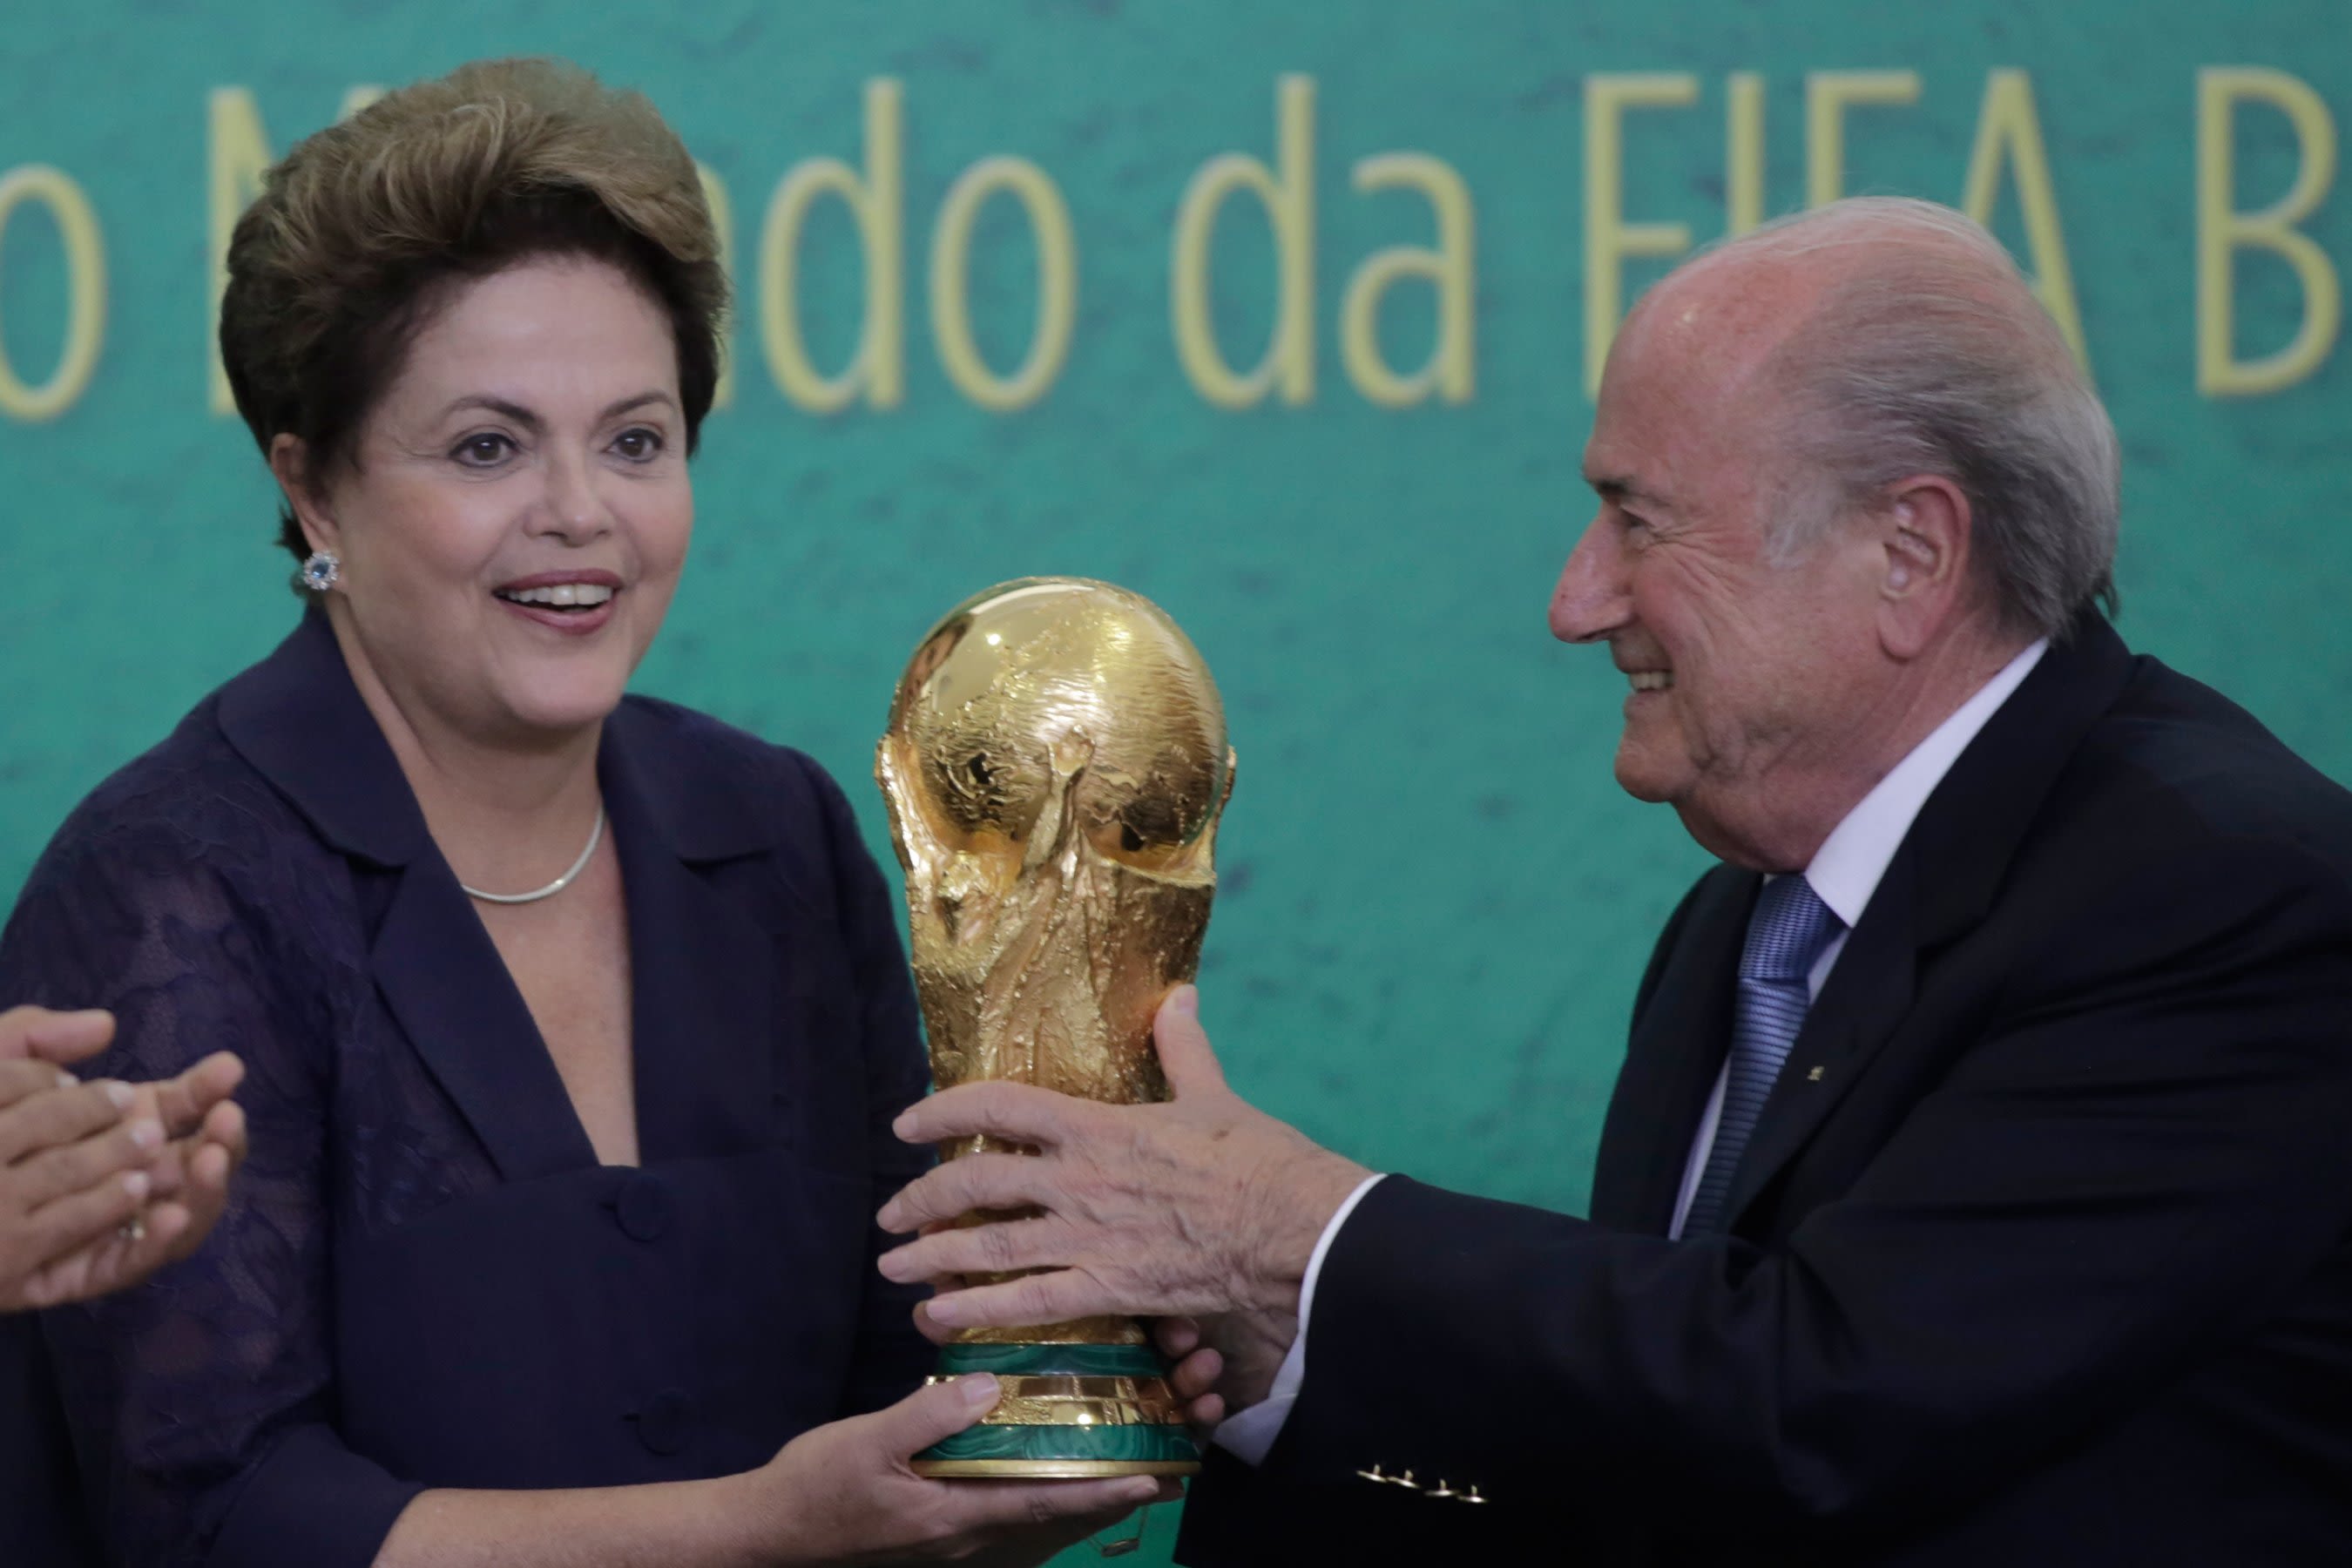 Brazil's President welcomes World Cup